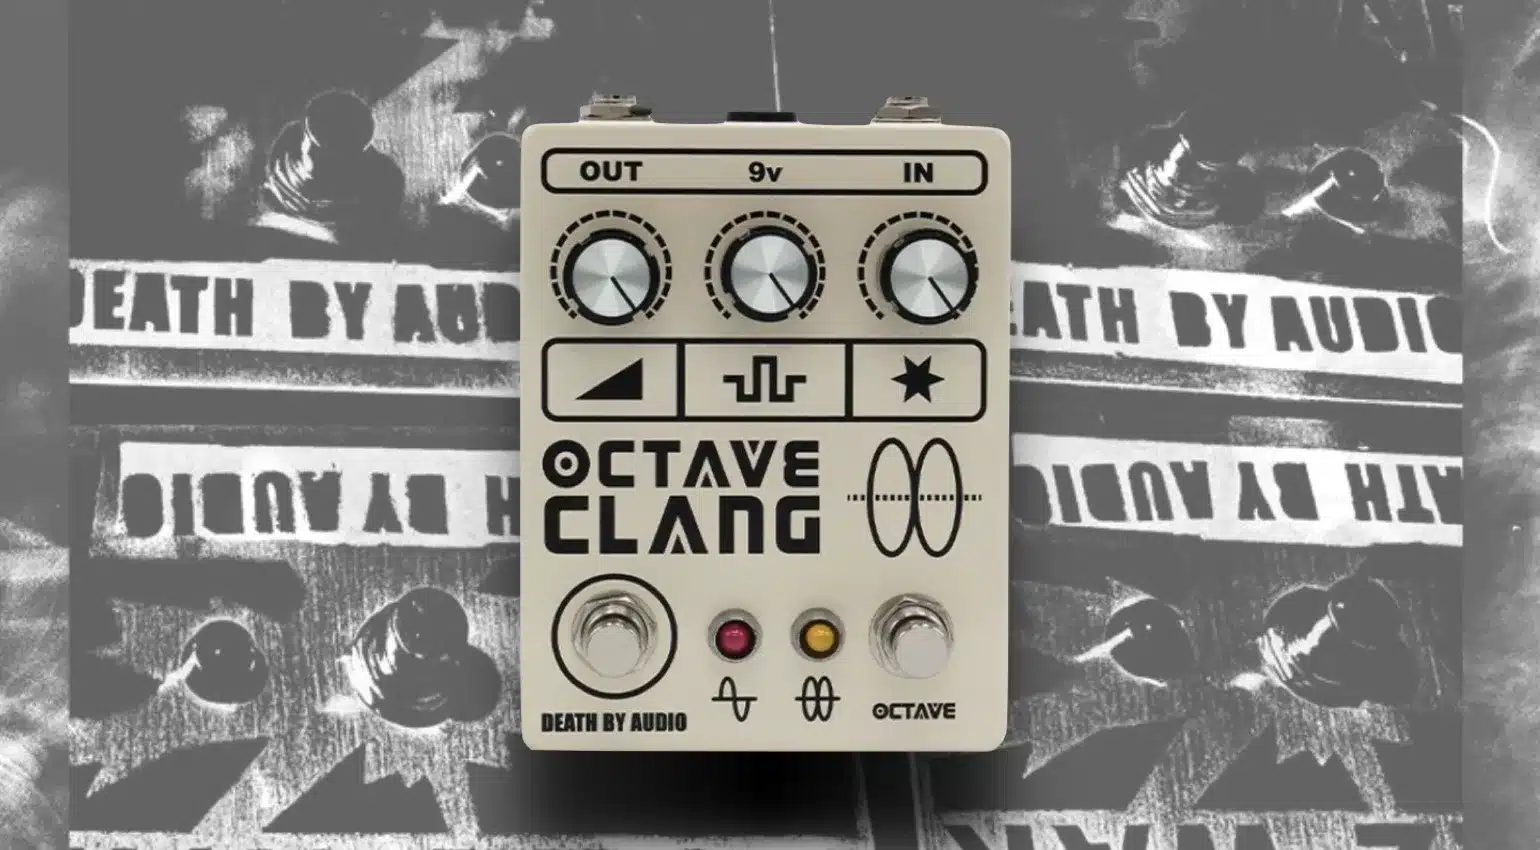 Death By Audio Octave Clang fuzz pedal distortion pedal octave pedal guitar effects